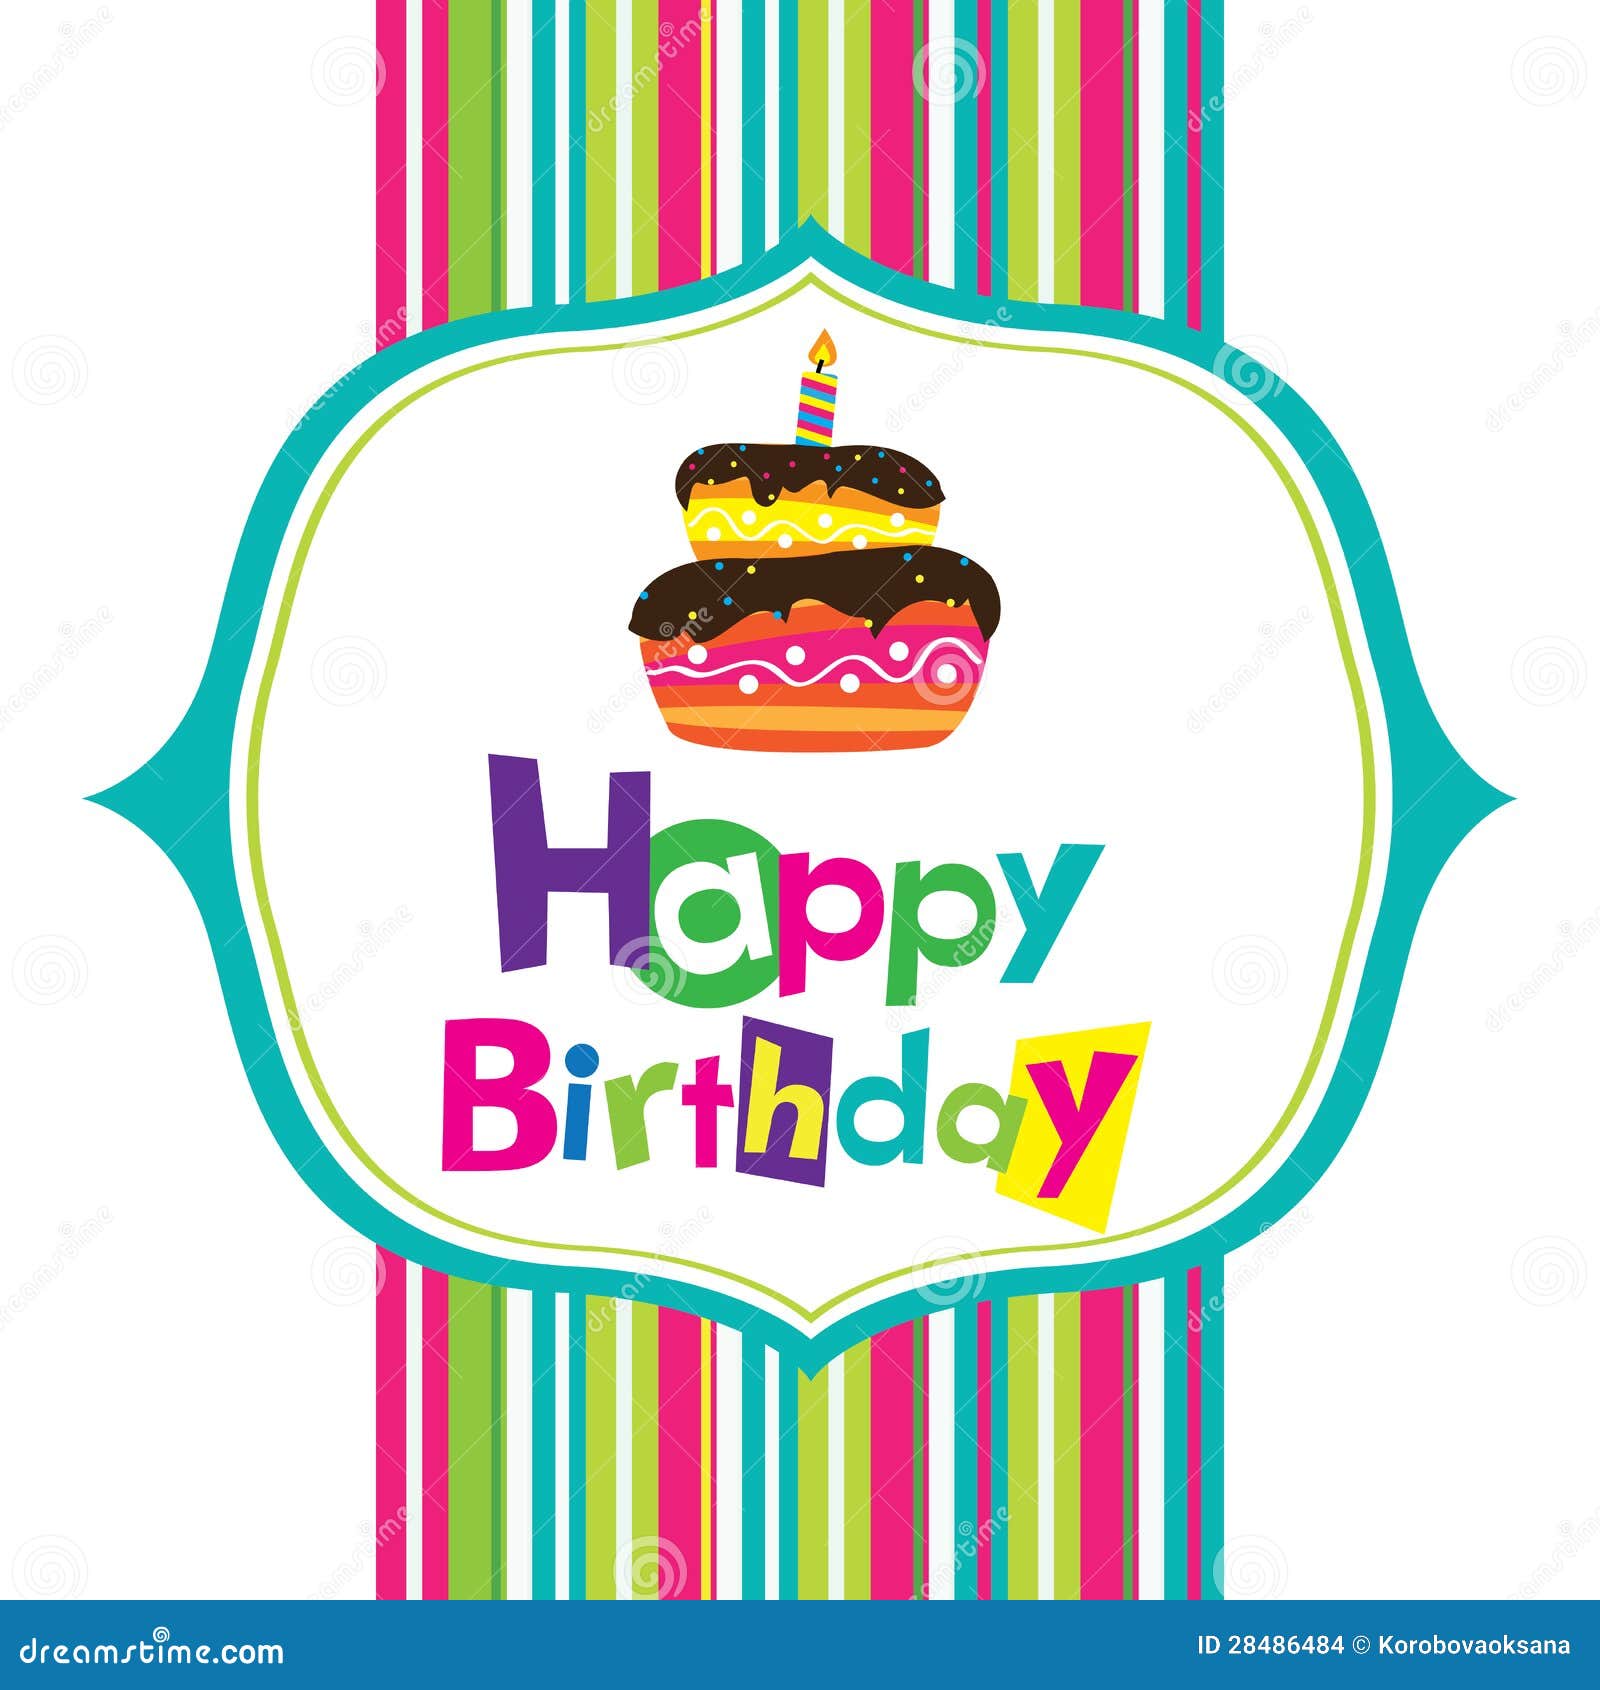  Vector  Happy Birthday  Card  Stock Images Image 28486484